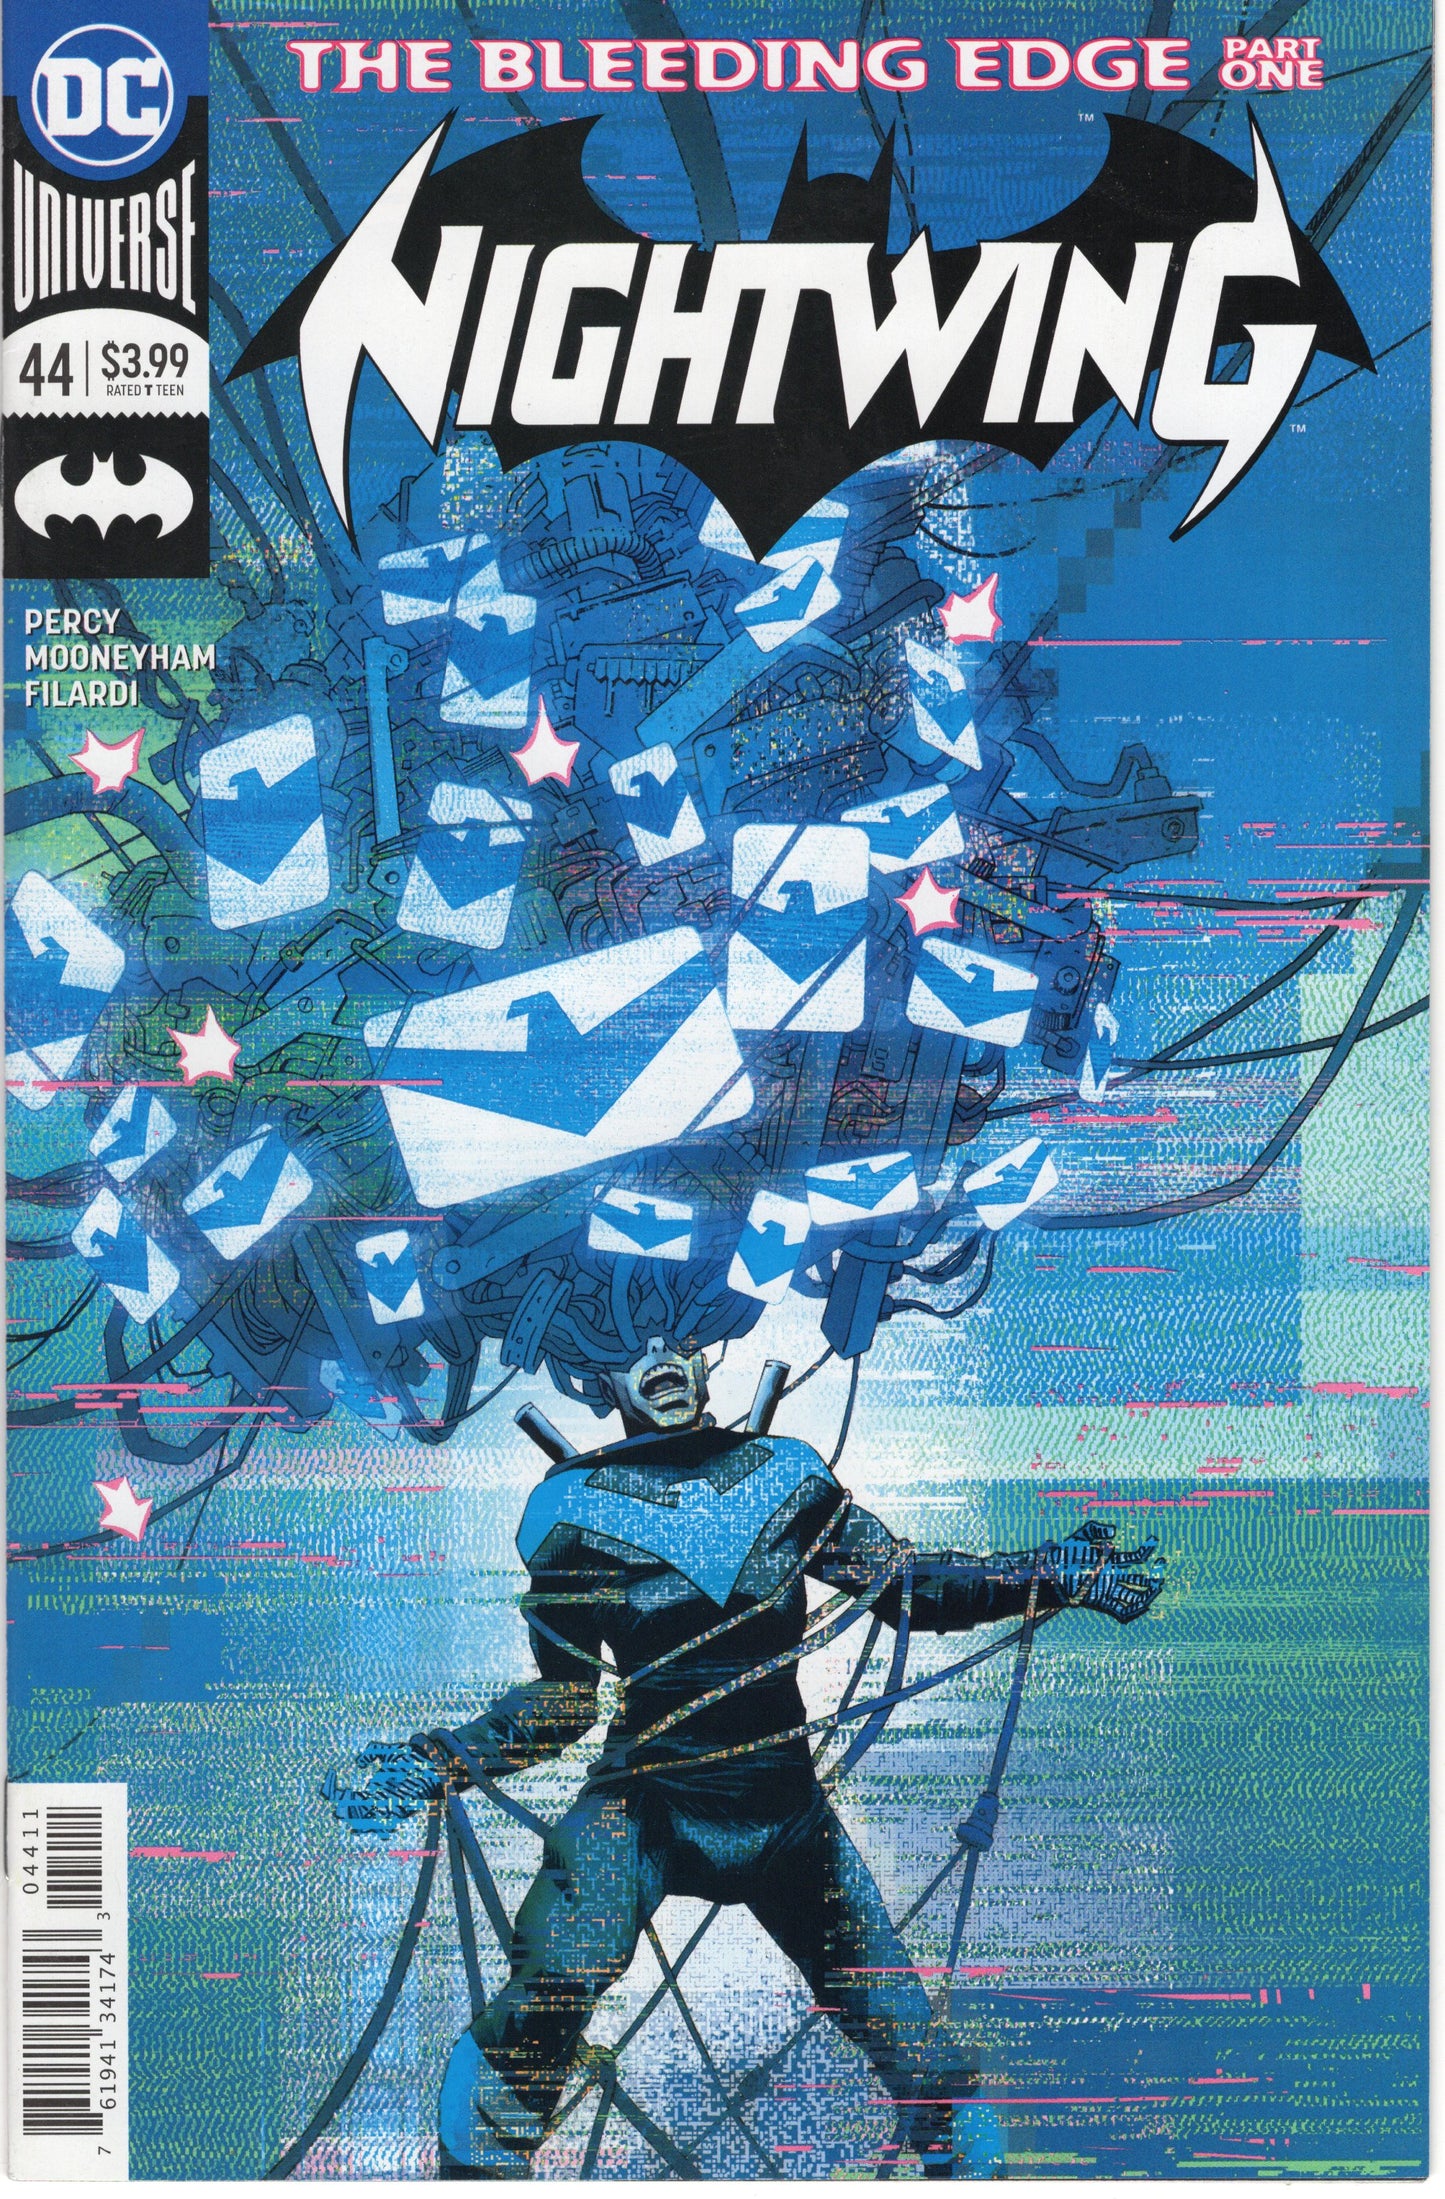 Nightwing Issue #44 (July. 2018 - DC Comics) VF+